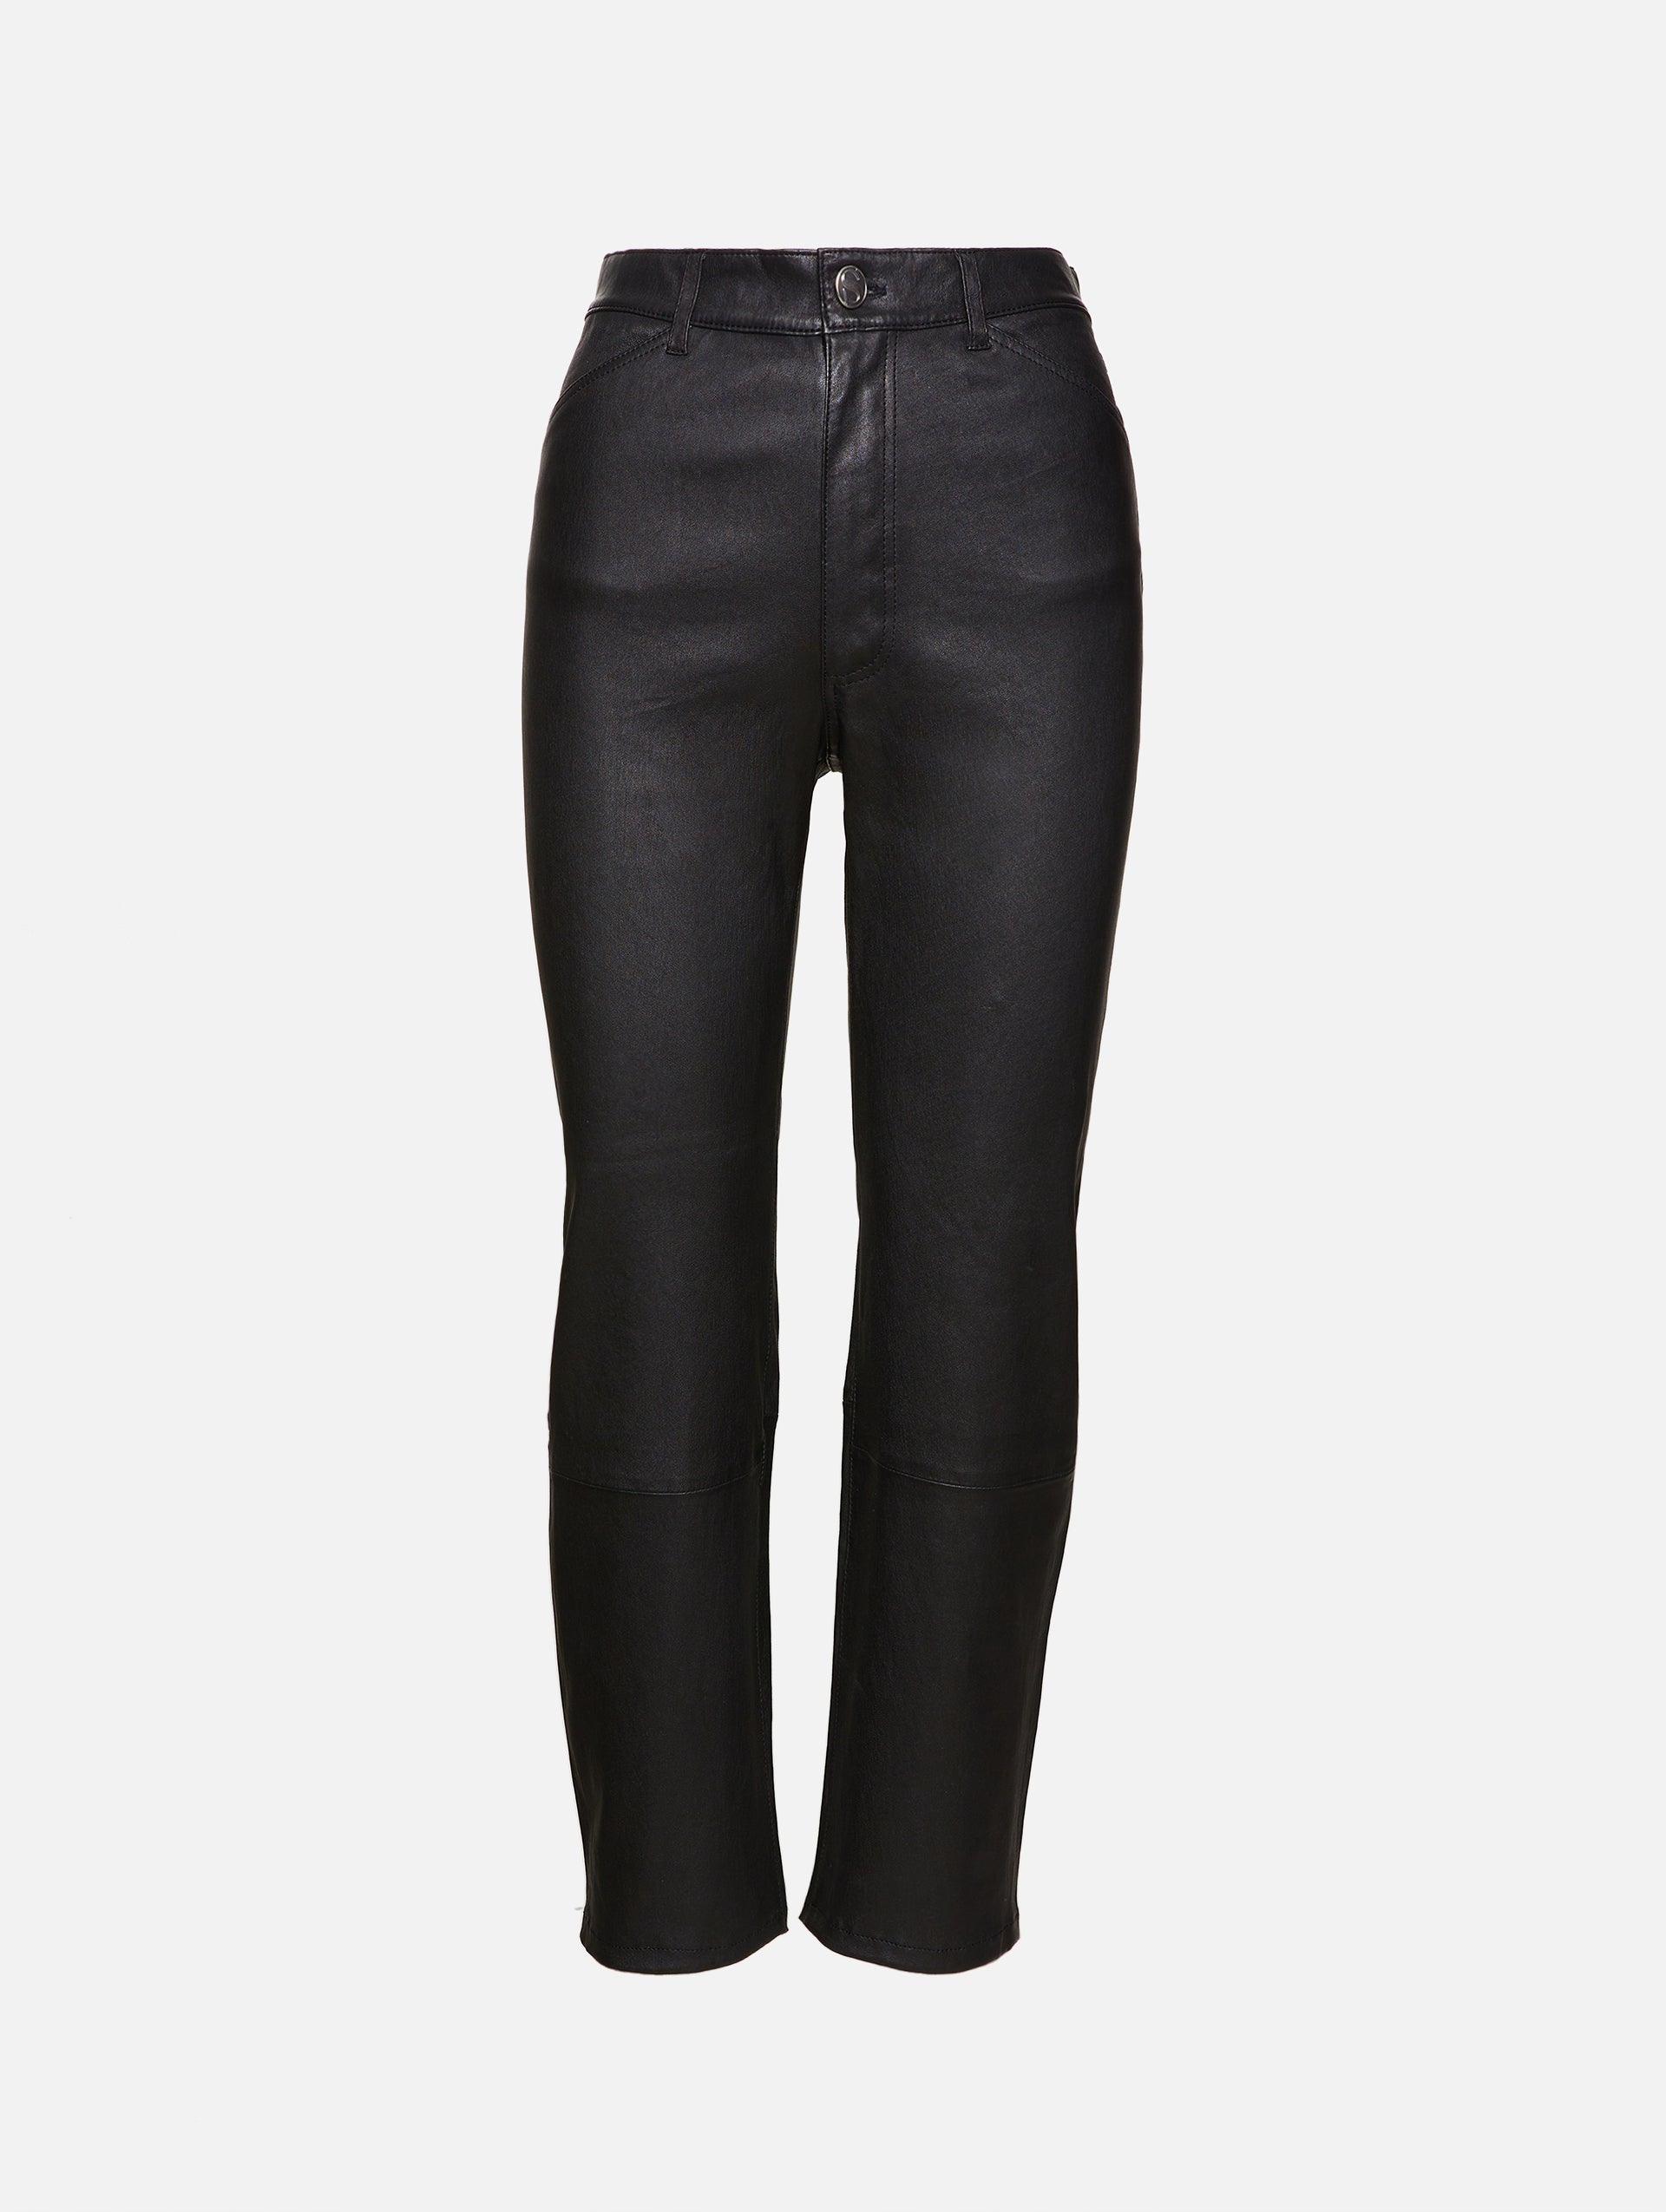 Buy Love & Roses Black Faux Leather Straight Leg Trousers from Next Hungary